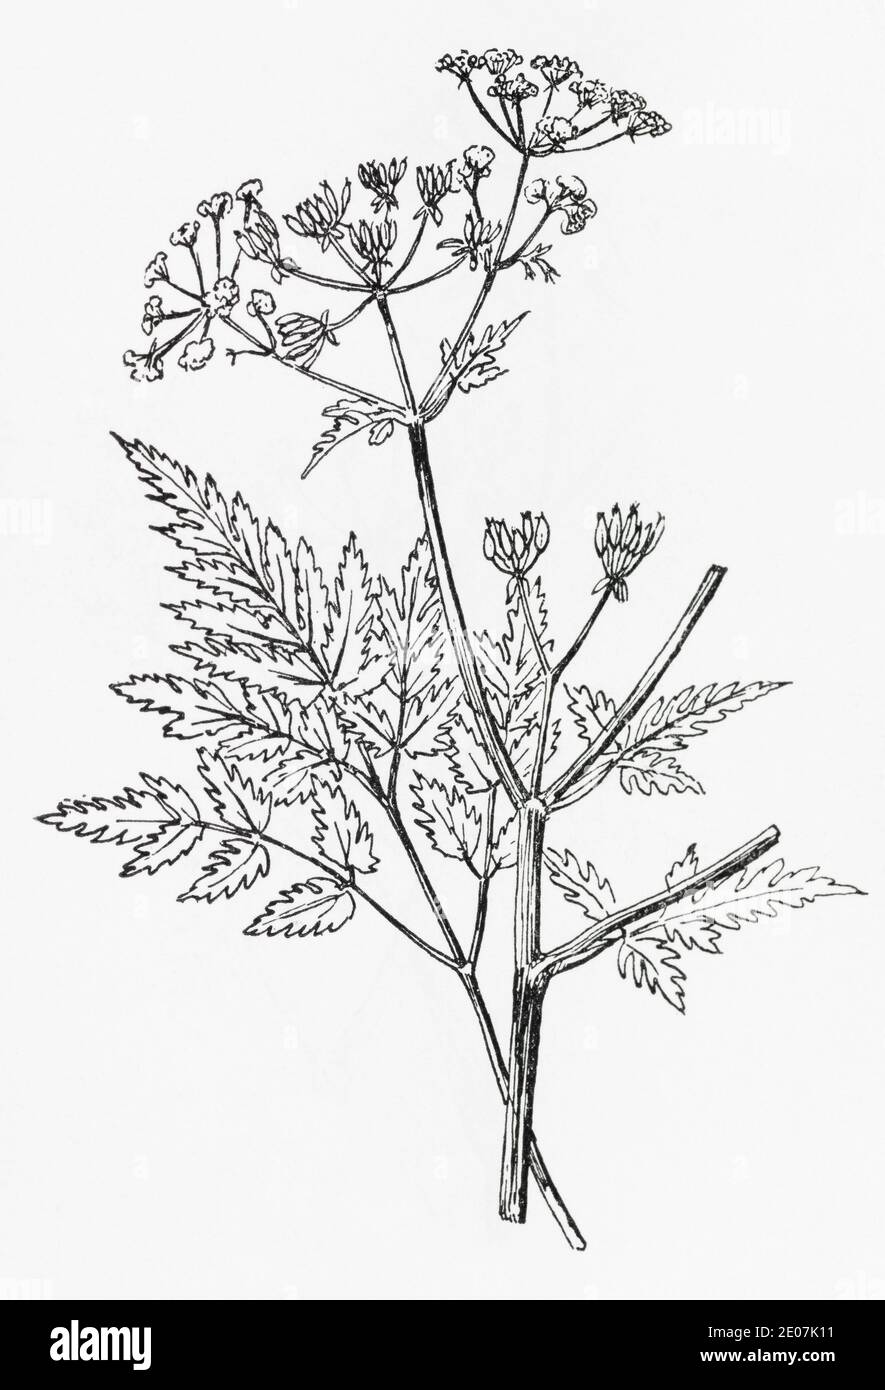 Old botanical illustration engraving of Cow Parsley / Anthriscus sylvestris. Drawings of British umbellifers. See Notes Stock Photo